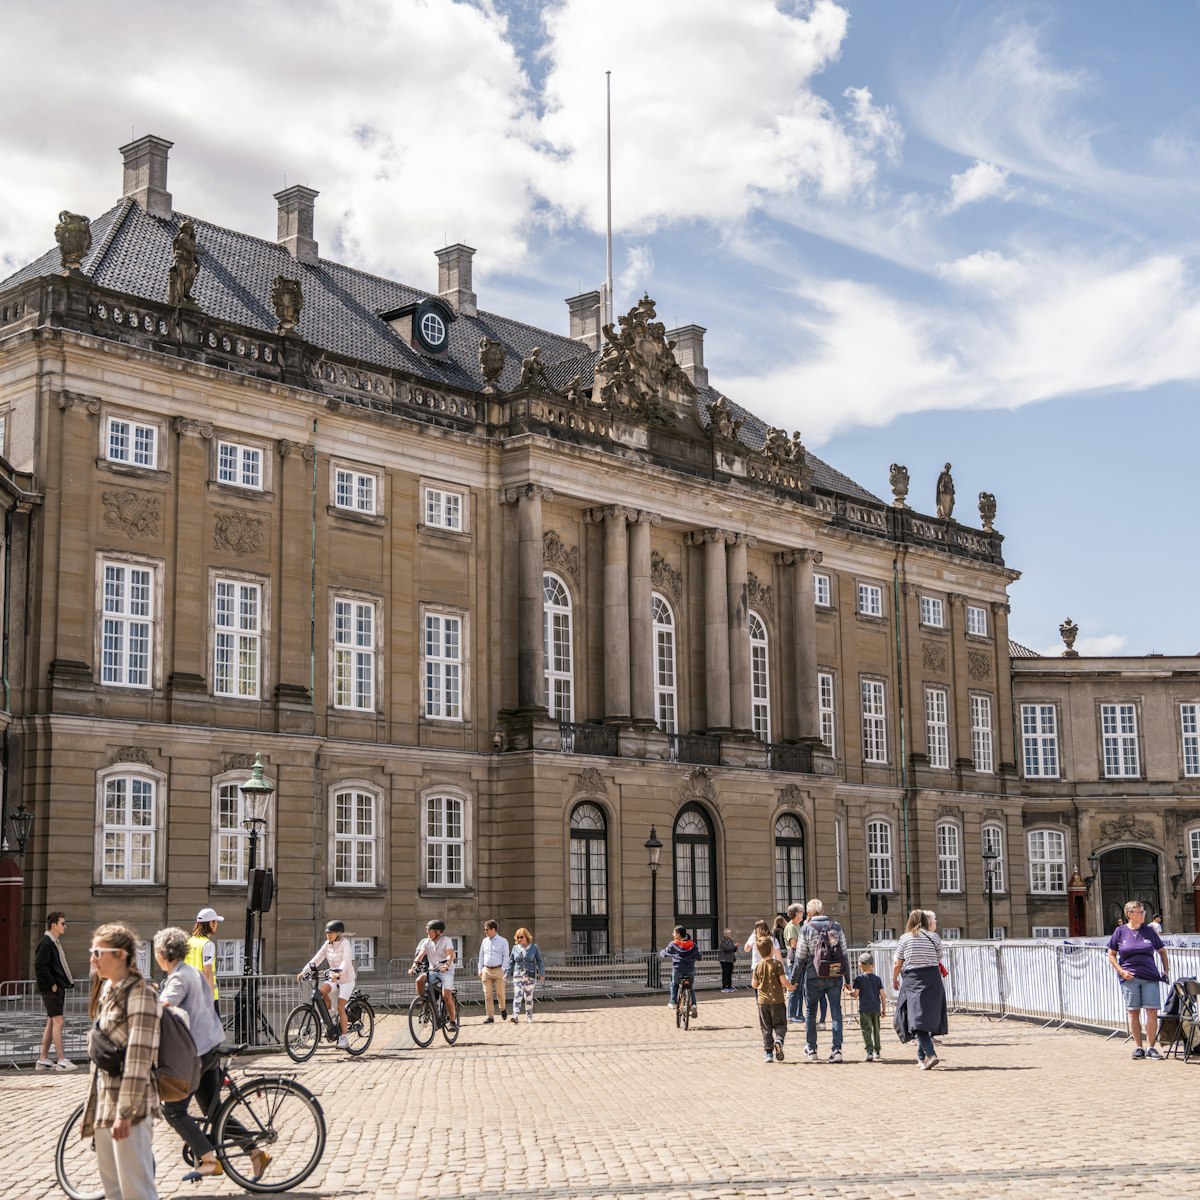 Amalienborg Palace in central Copenhagen consists of four mansions, two of which are home to the queen and the crown prince.